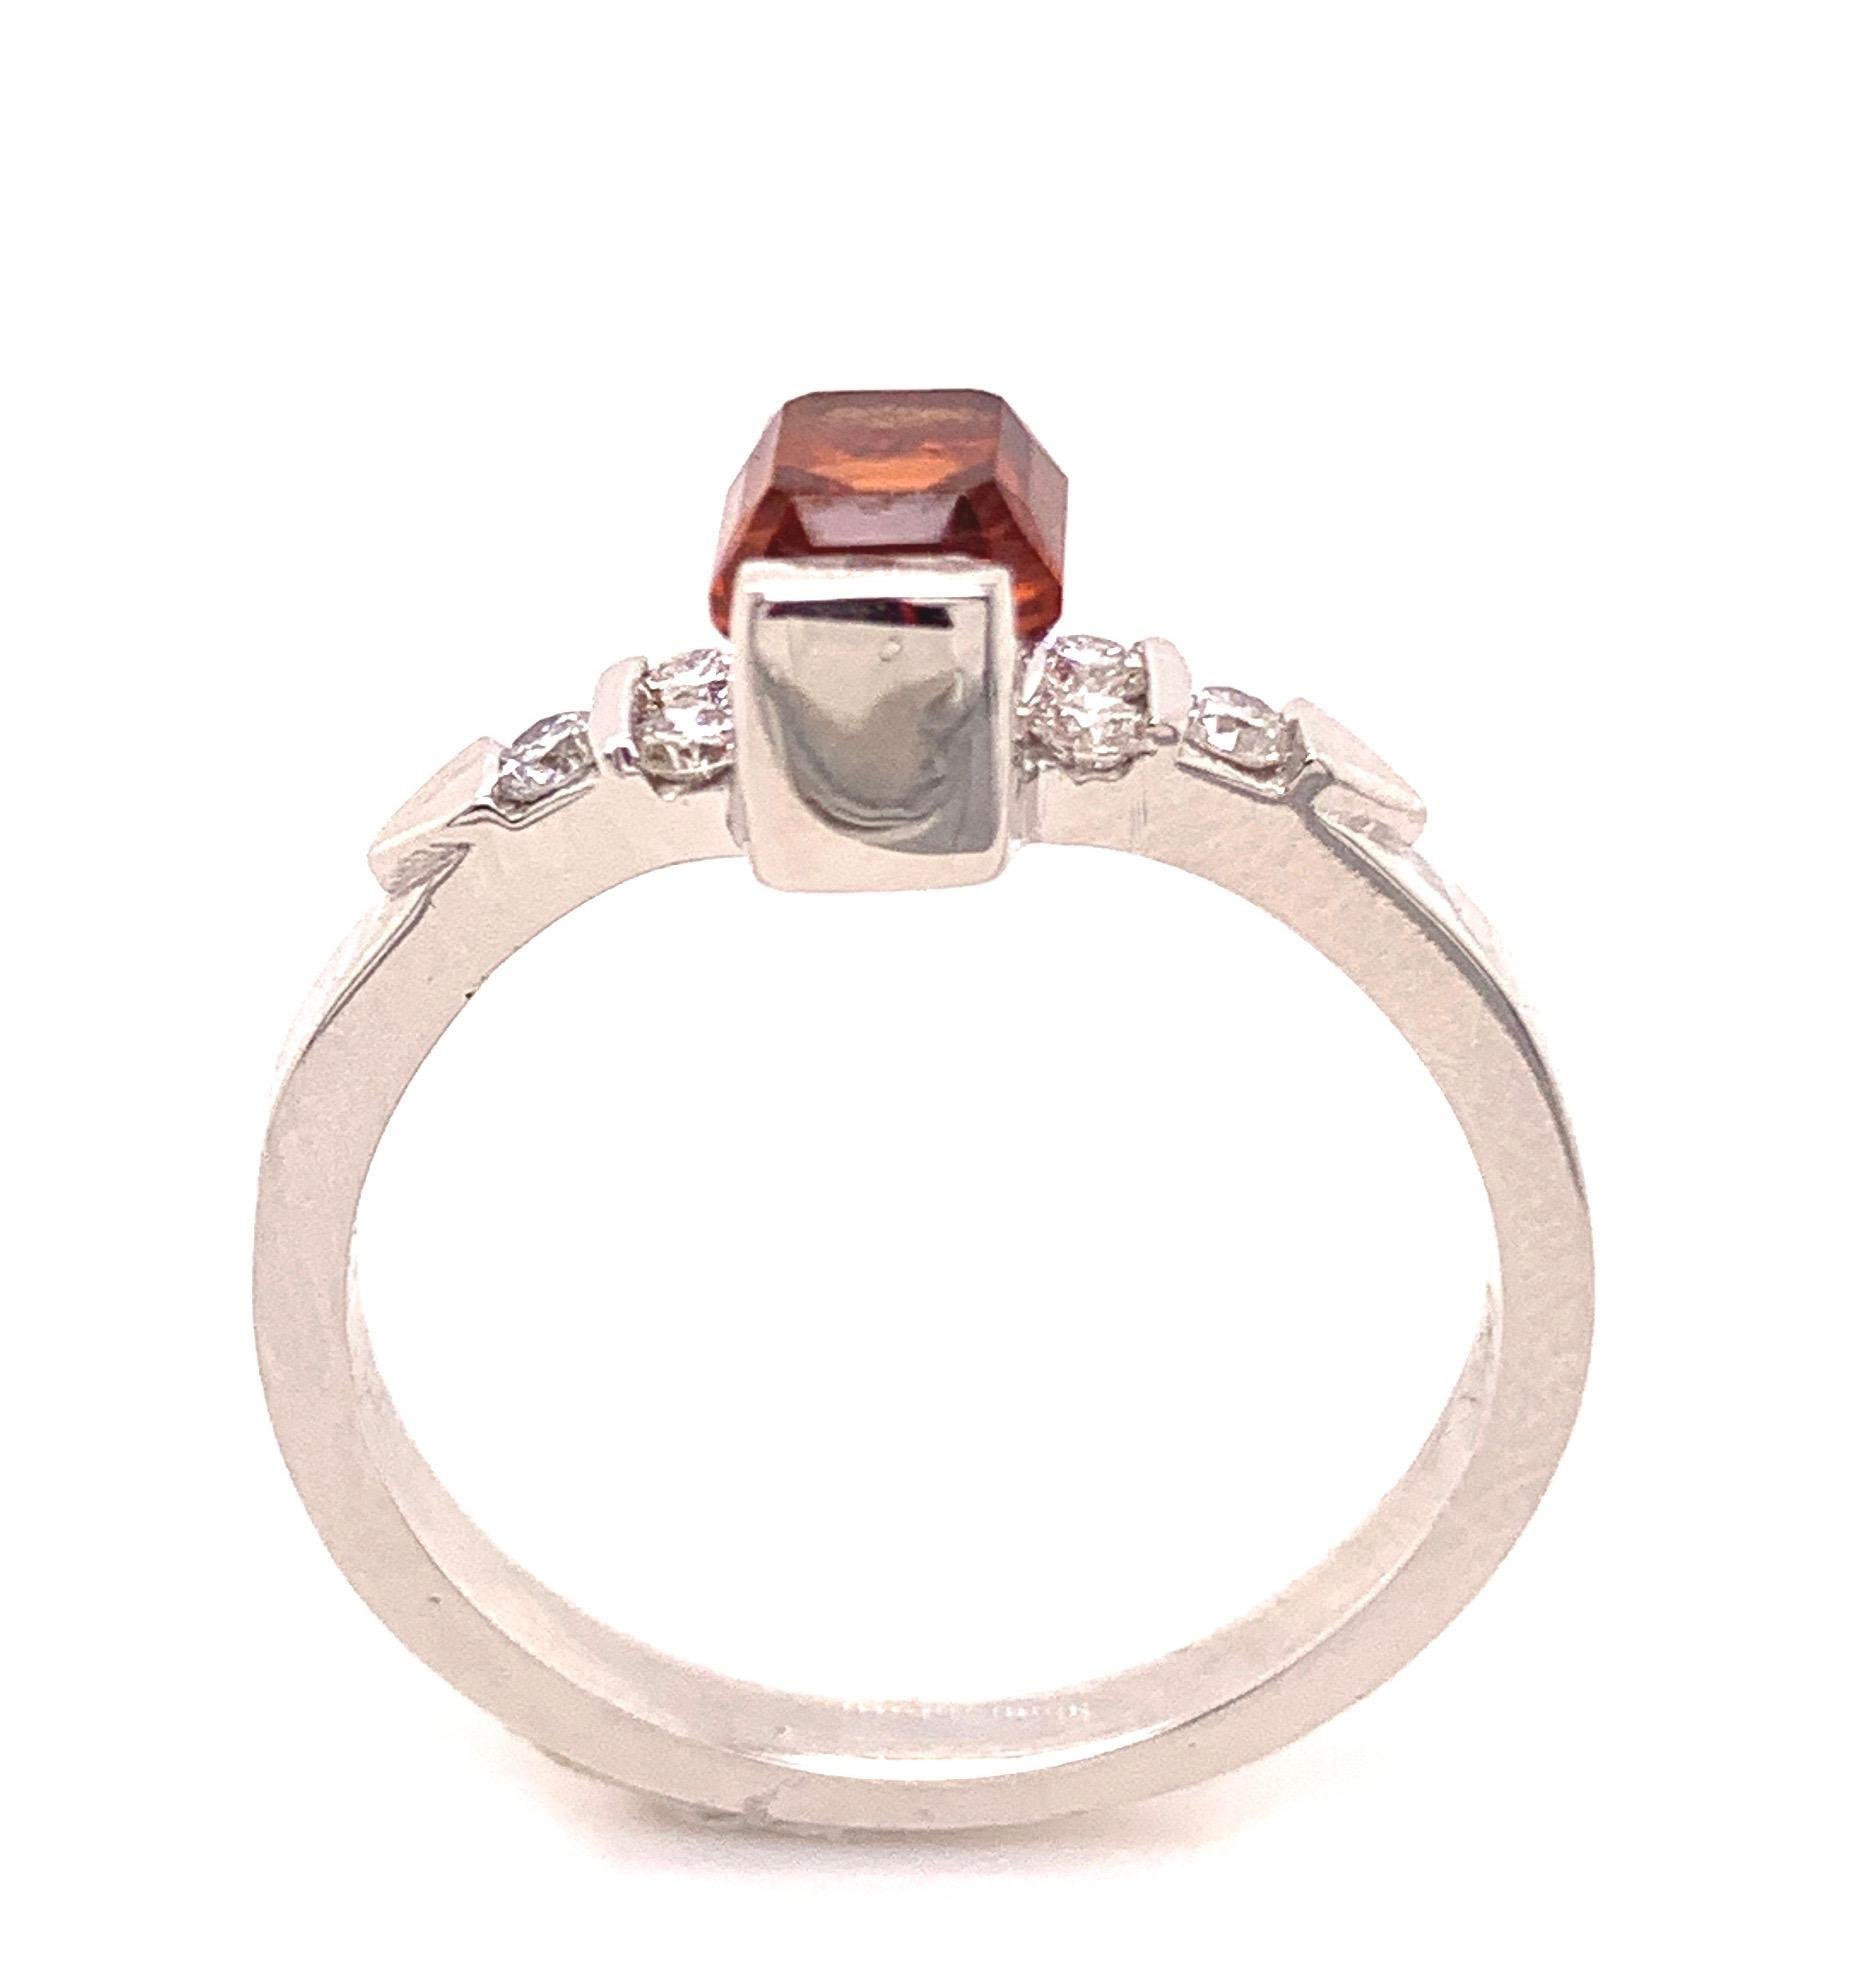 The State of California has been blessed with numerous gemstone deposits. 
This 14-karate white gold and Diamond ring contains one of the more unusual California gems, a Spessartite Garnet from Ramona located in Southern California close to San